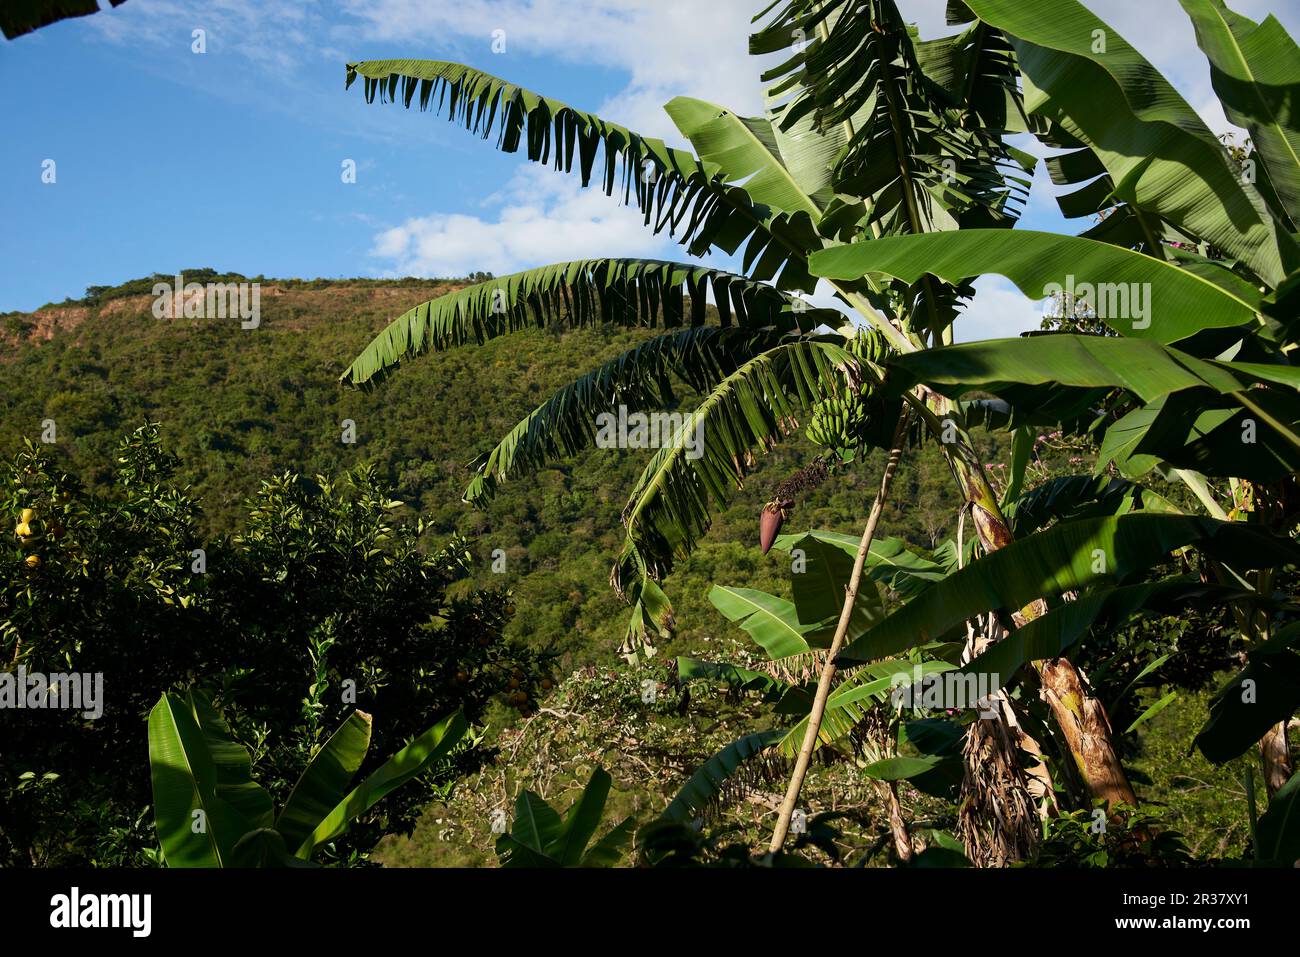 Palm tree with a bunch of green, unripe, bananas hanging, with the flower at the end of the cluster. Plantation in Santander, Colombia. Stock Photo